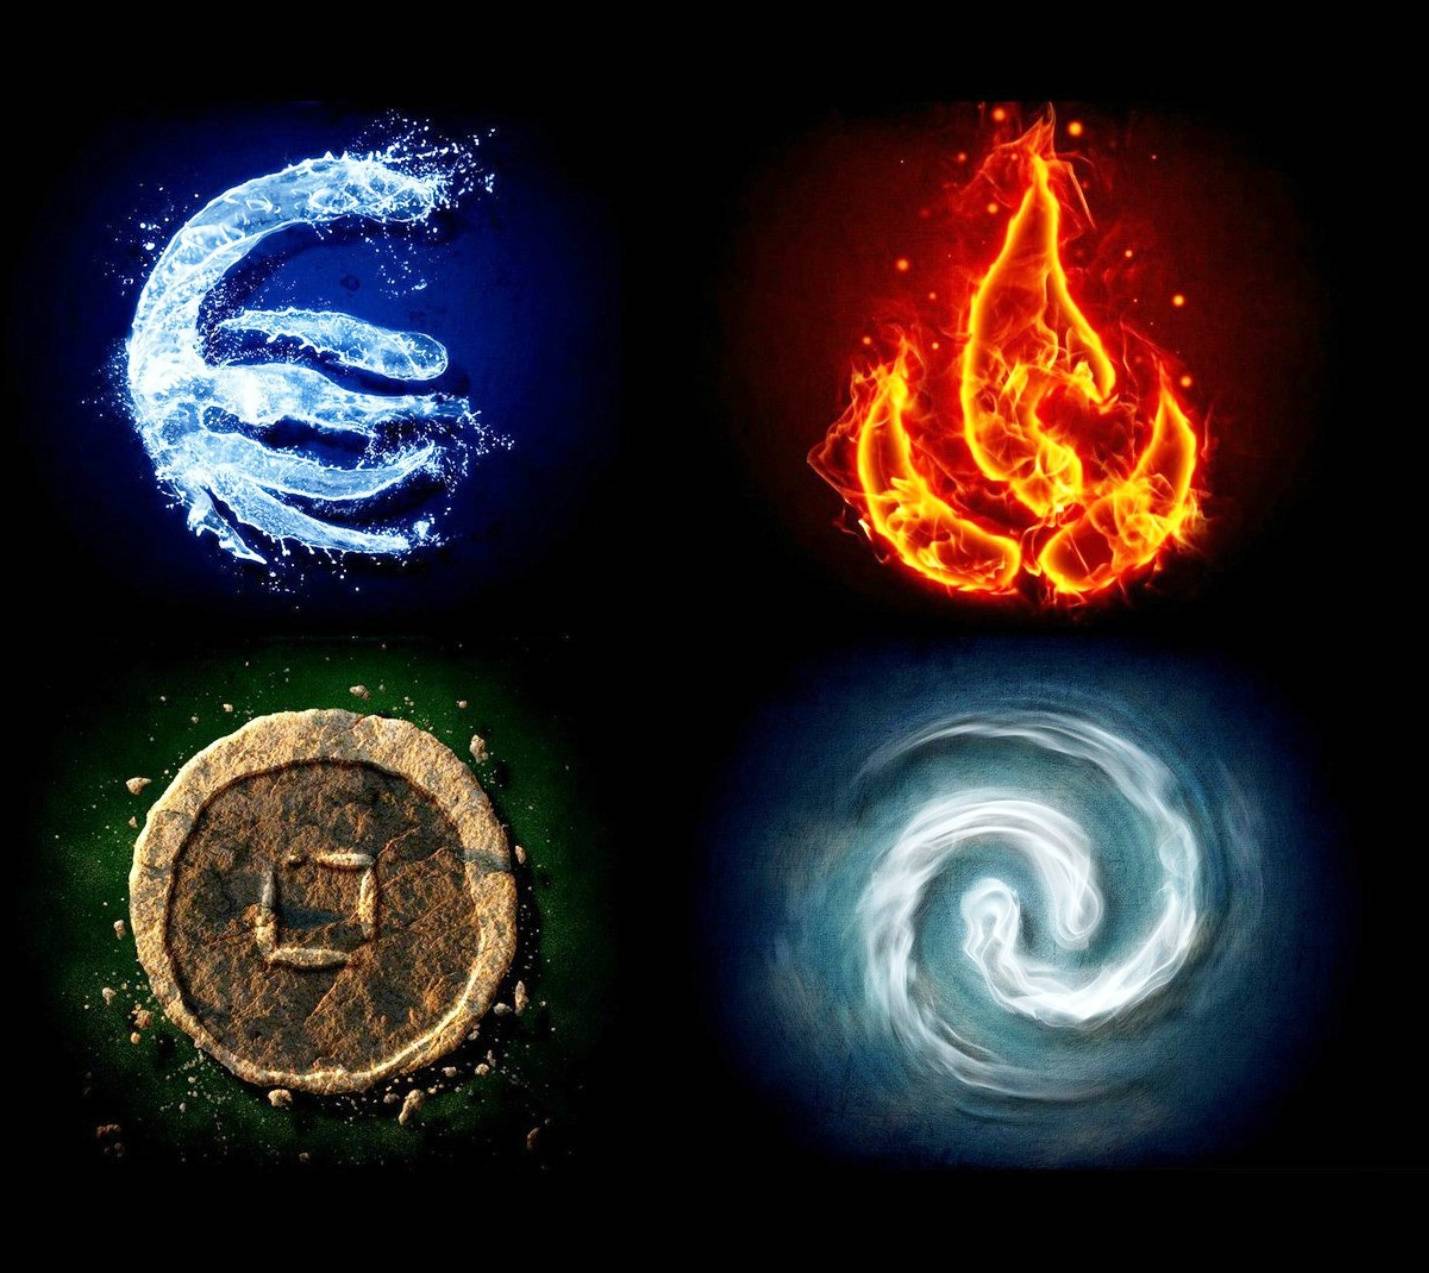 Download free 4 elements wallpaper for your mobile phone